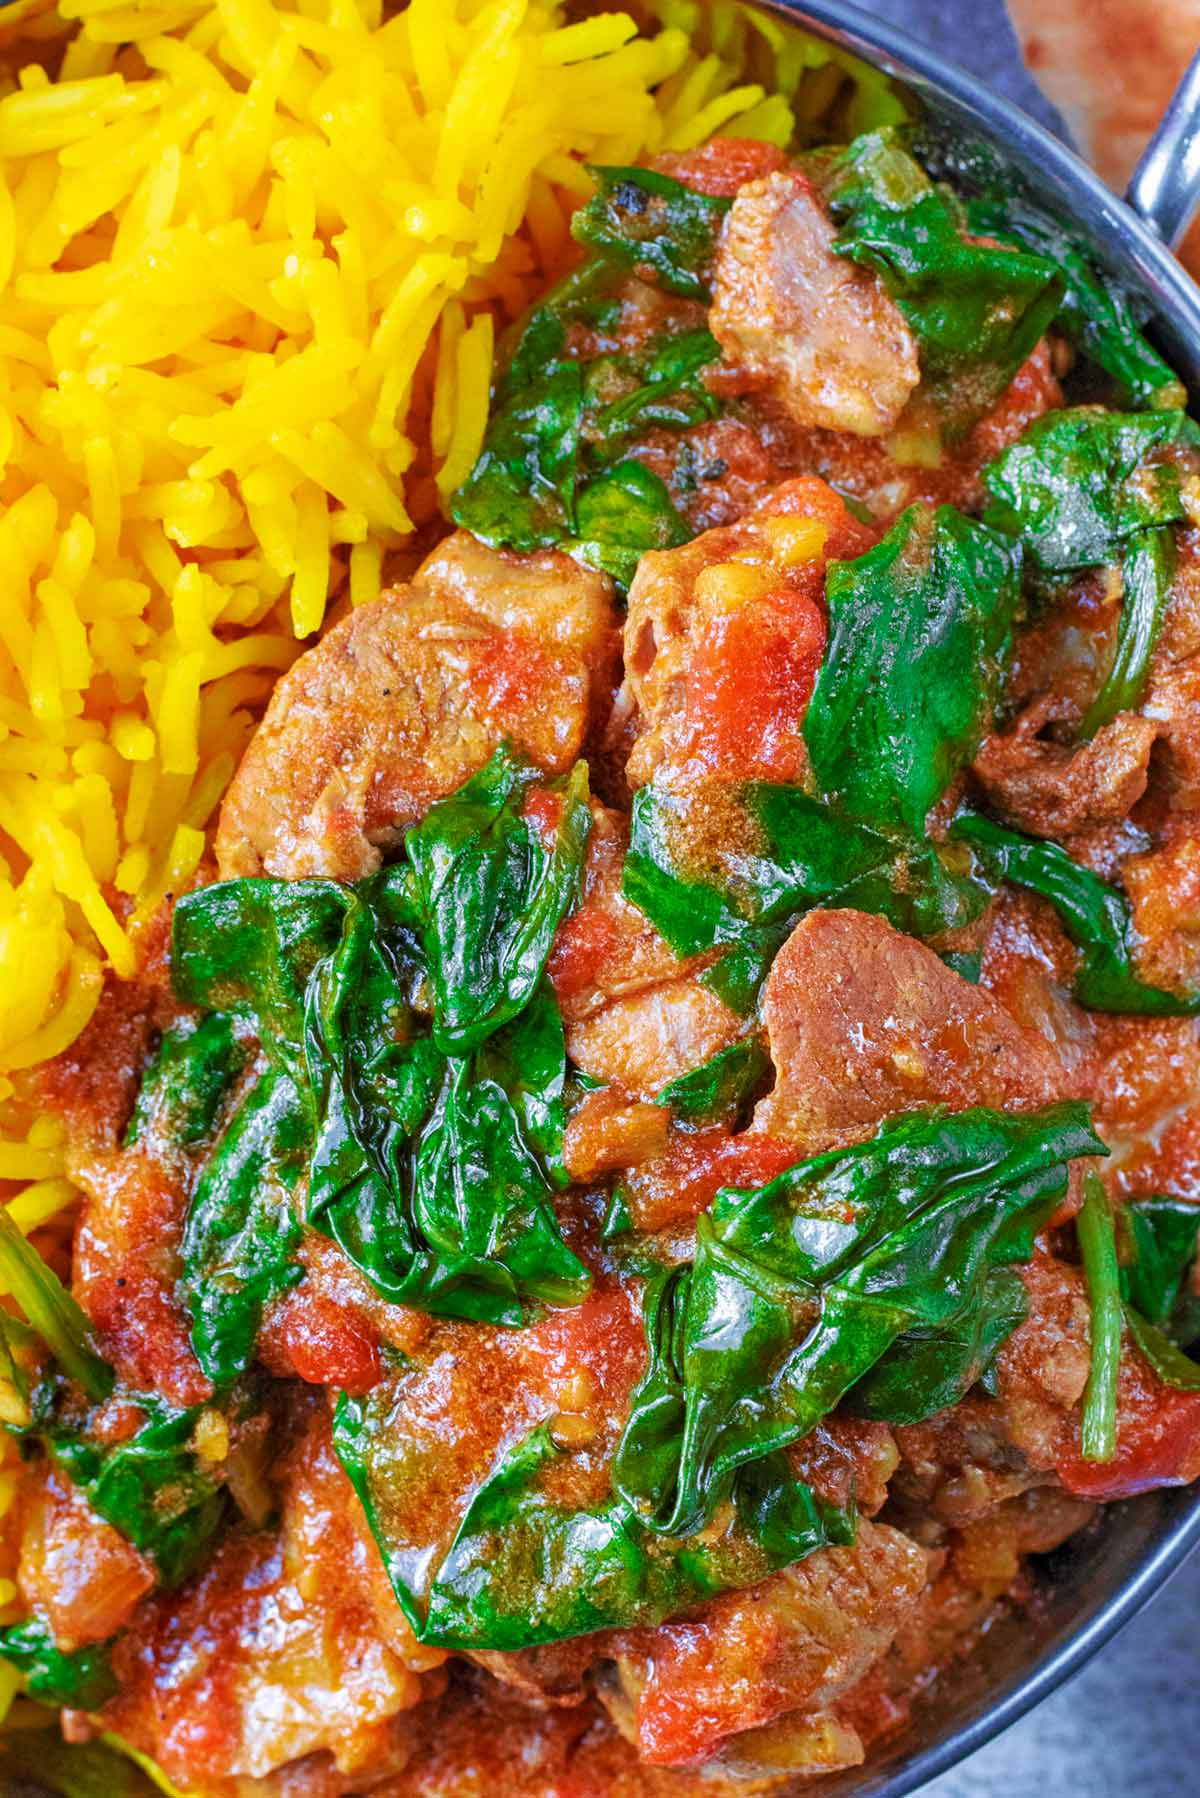 Lamb and spinach in a curry with bright yellow rice.